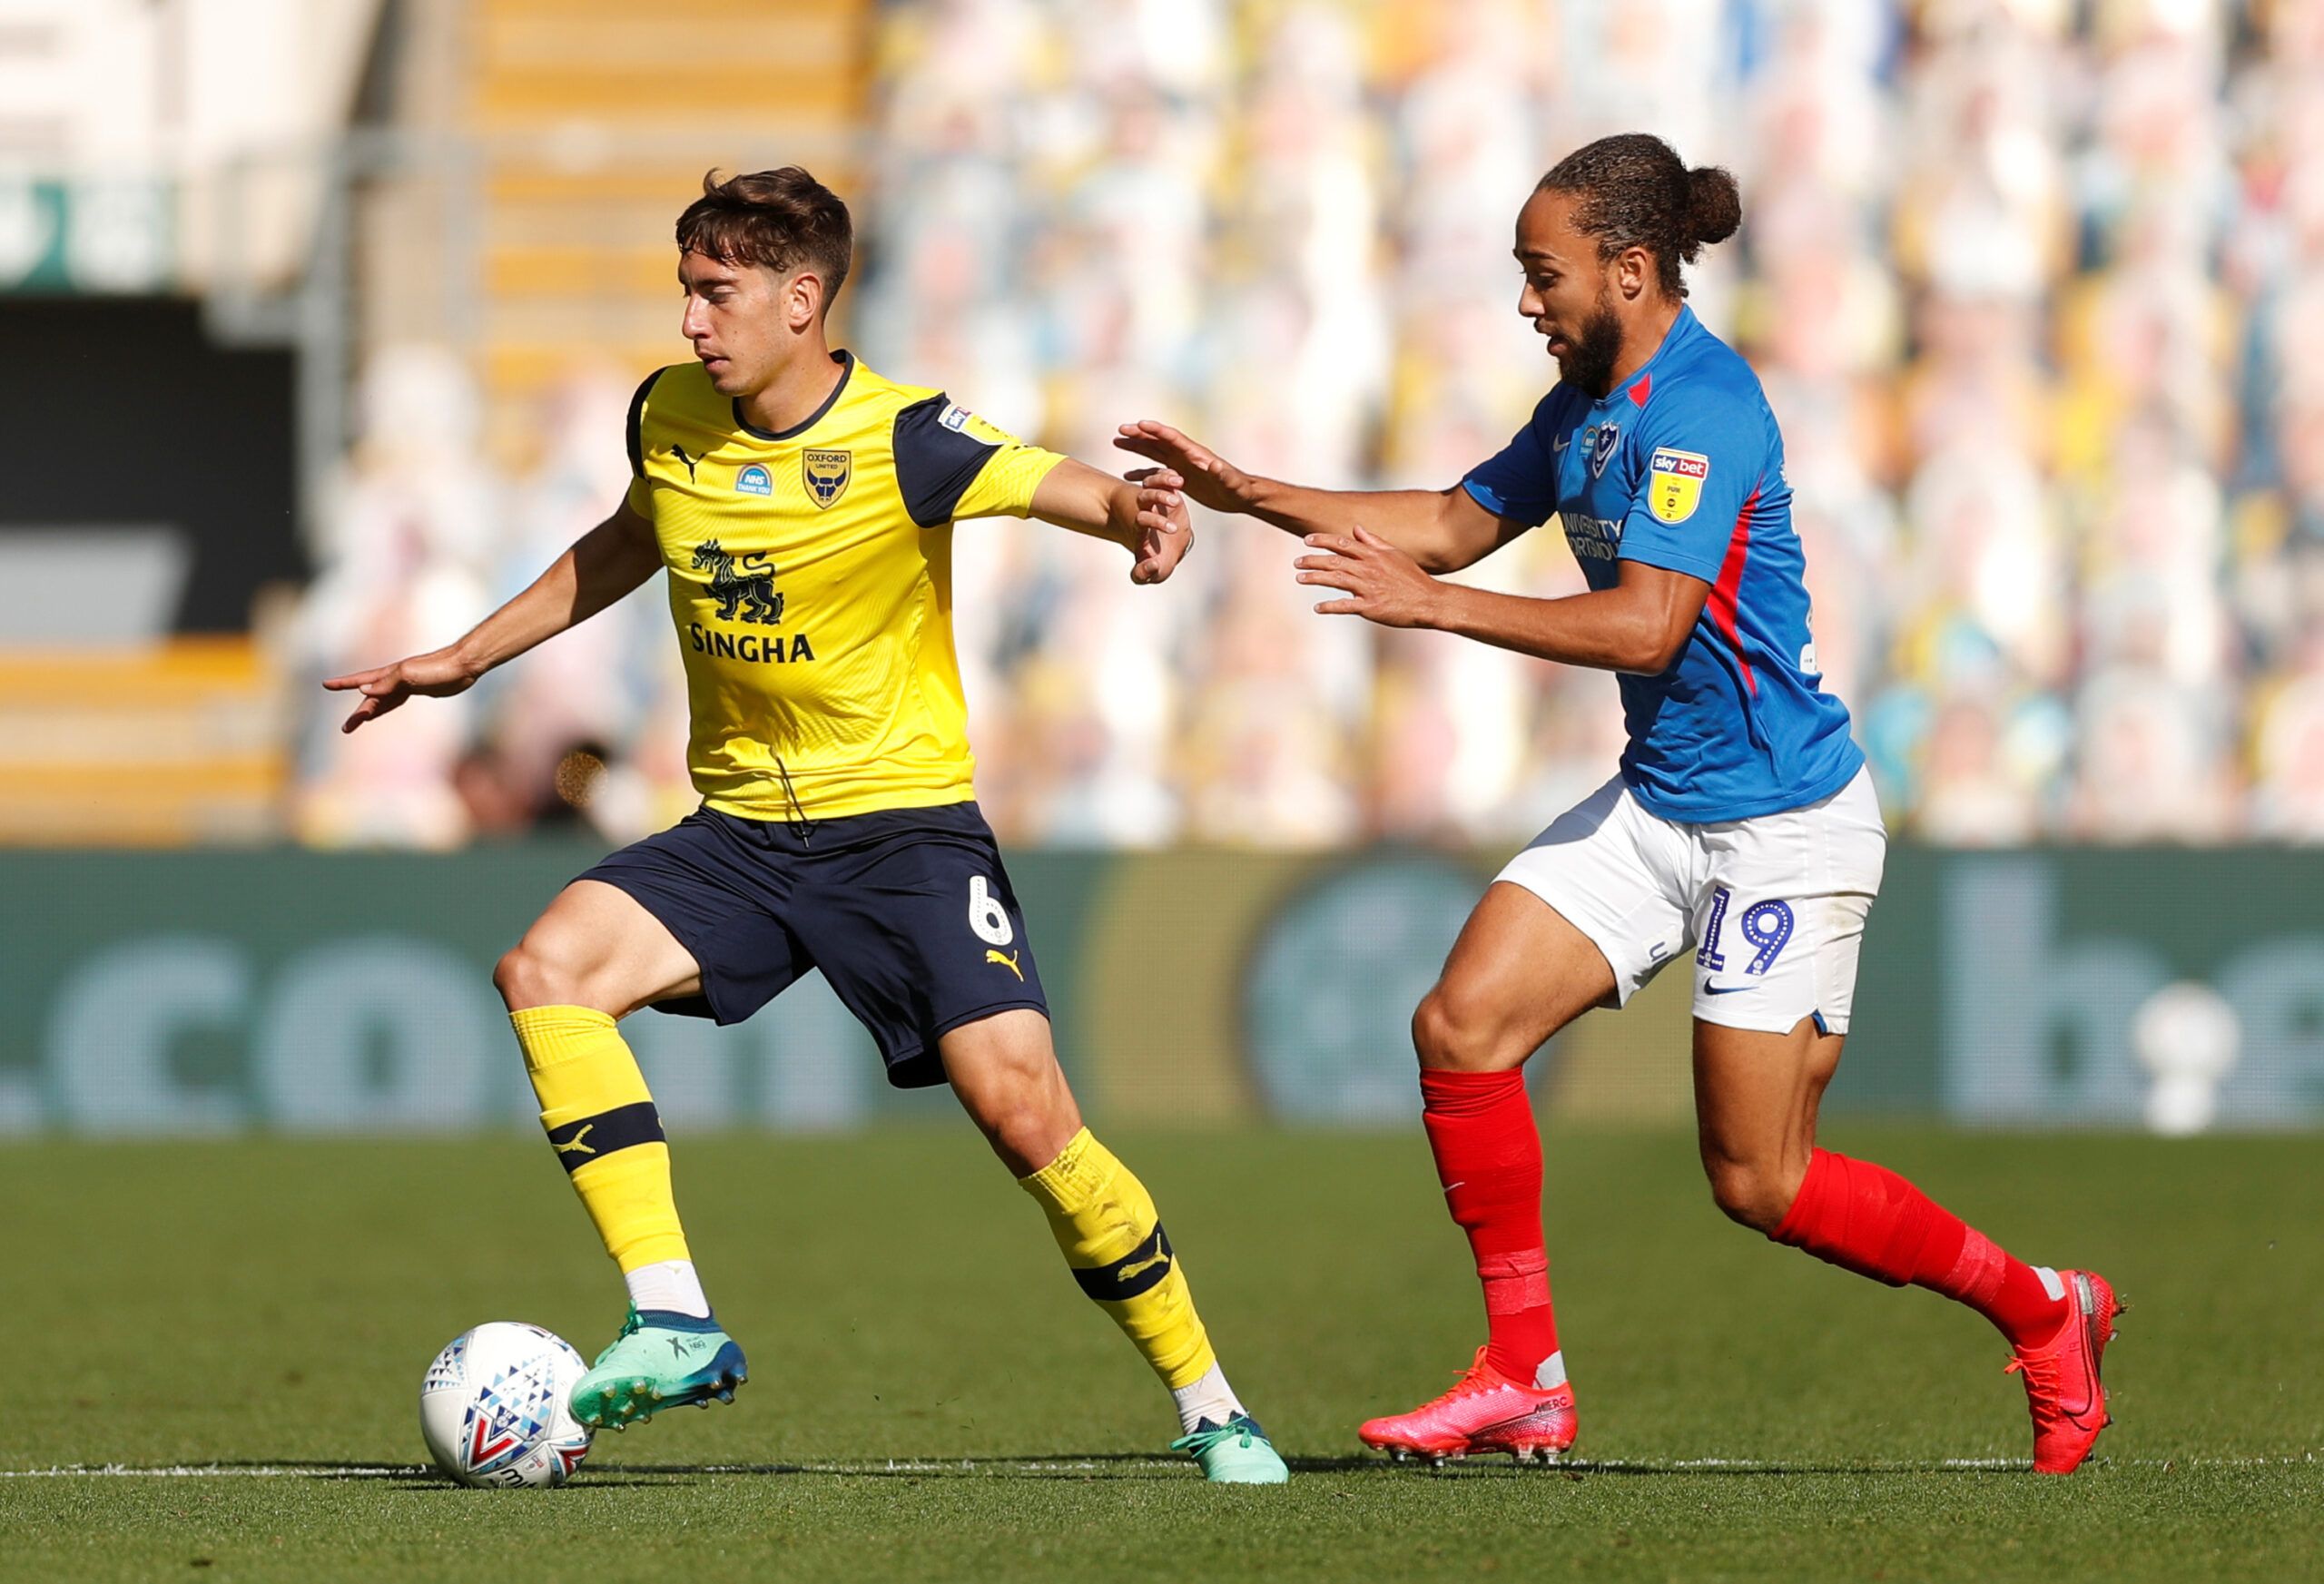 Soccer Football - League One Play Off Semi Final Second Leg - Oxford United v Portsmouth - Kassam Stadium, Oxford, Britain - July 6, 2020  Oxford's Alex Rodriguez in action with Portsmouth's Marcus Myers-Harness, as play resumes behind closed doors following the outbreak of the coronavirus disease (COVID-19)  Action Images/Matthew Childs  EDITORIAL USE ONLY. No use with unauthorized audio, video, data, fixture lists, club/league logos or 